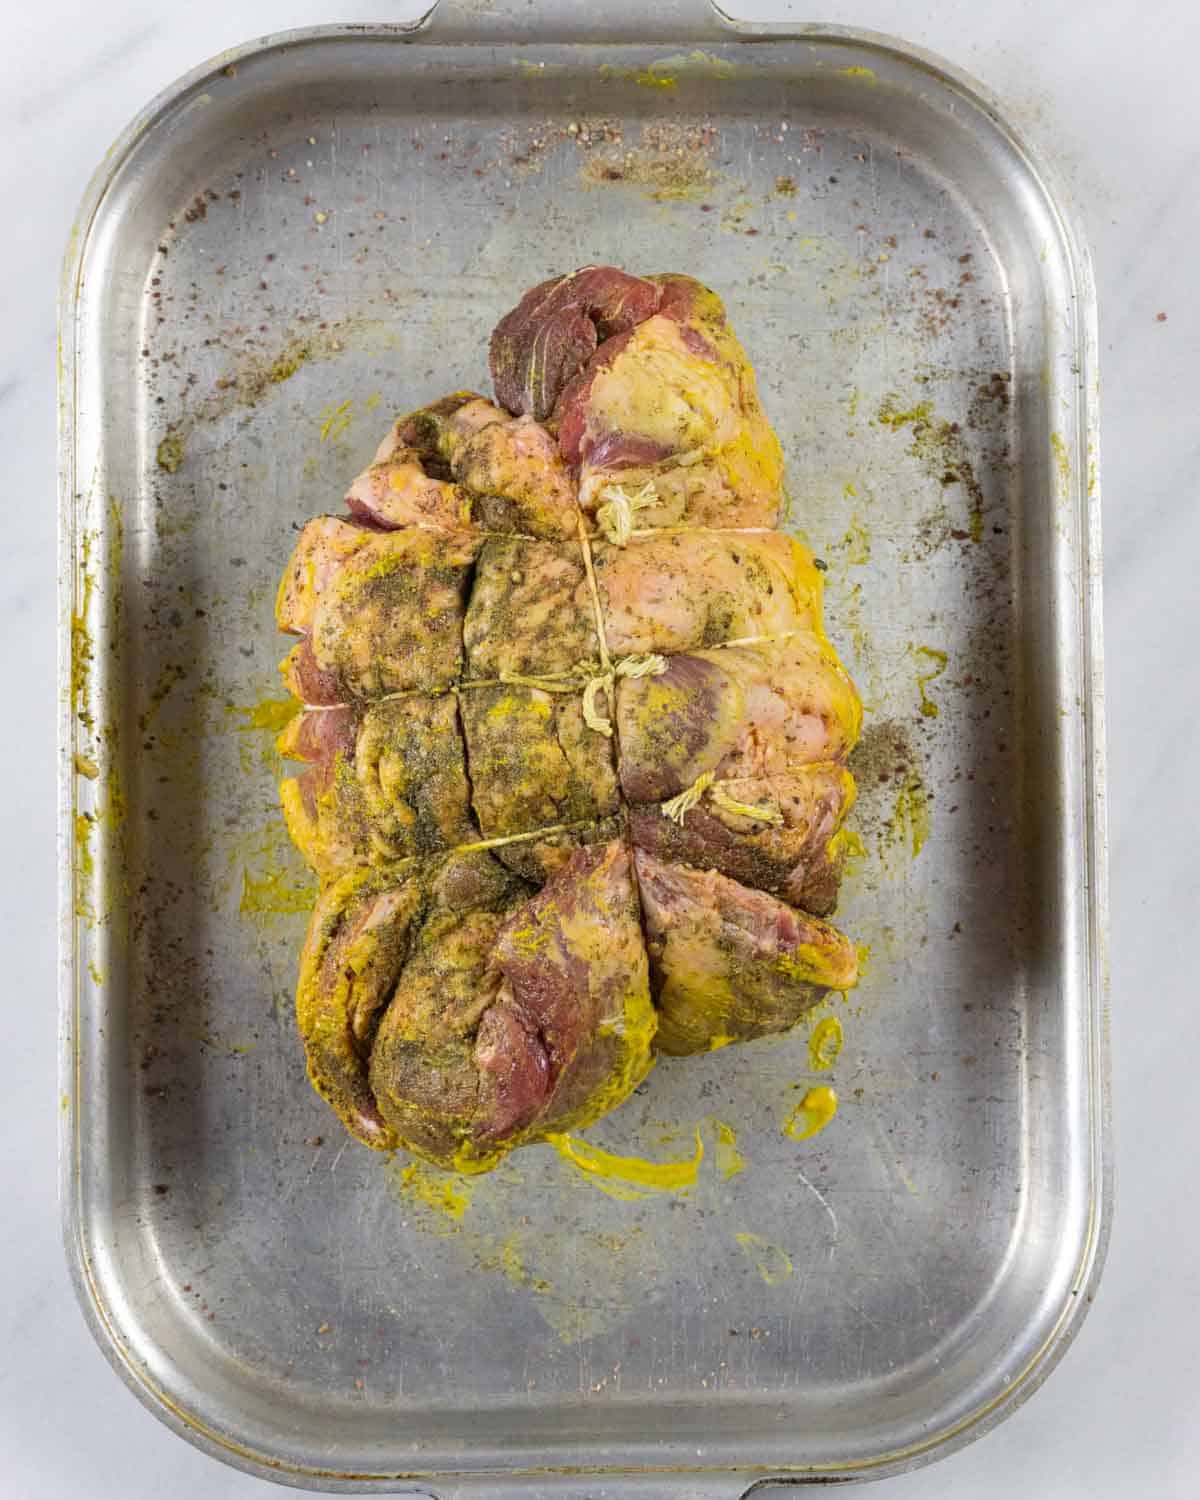 Boneless lamb roast seasoned and tied with butchers twine into tight form.